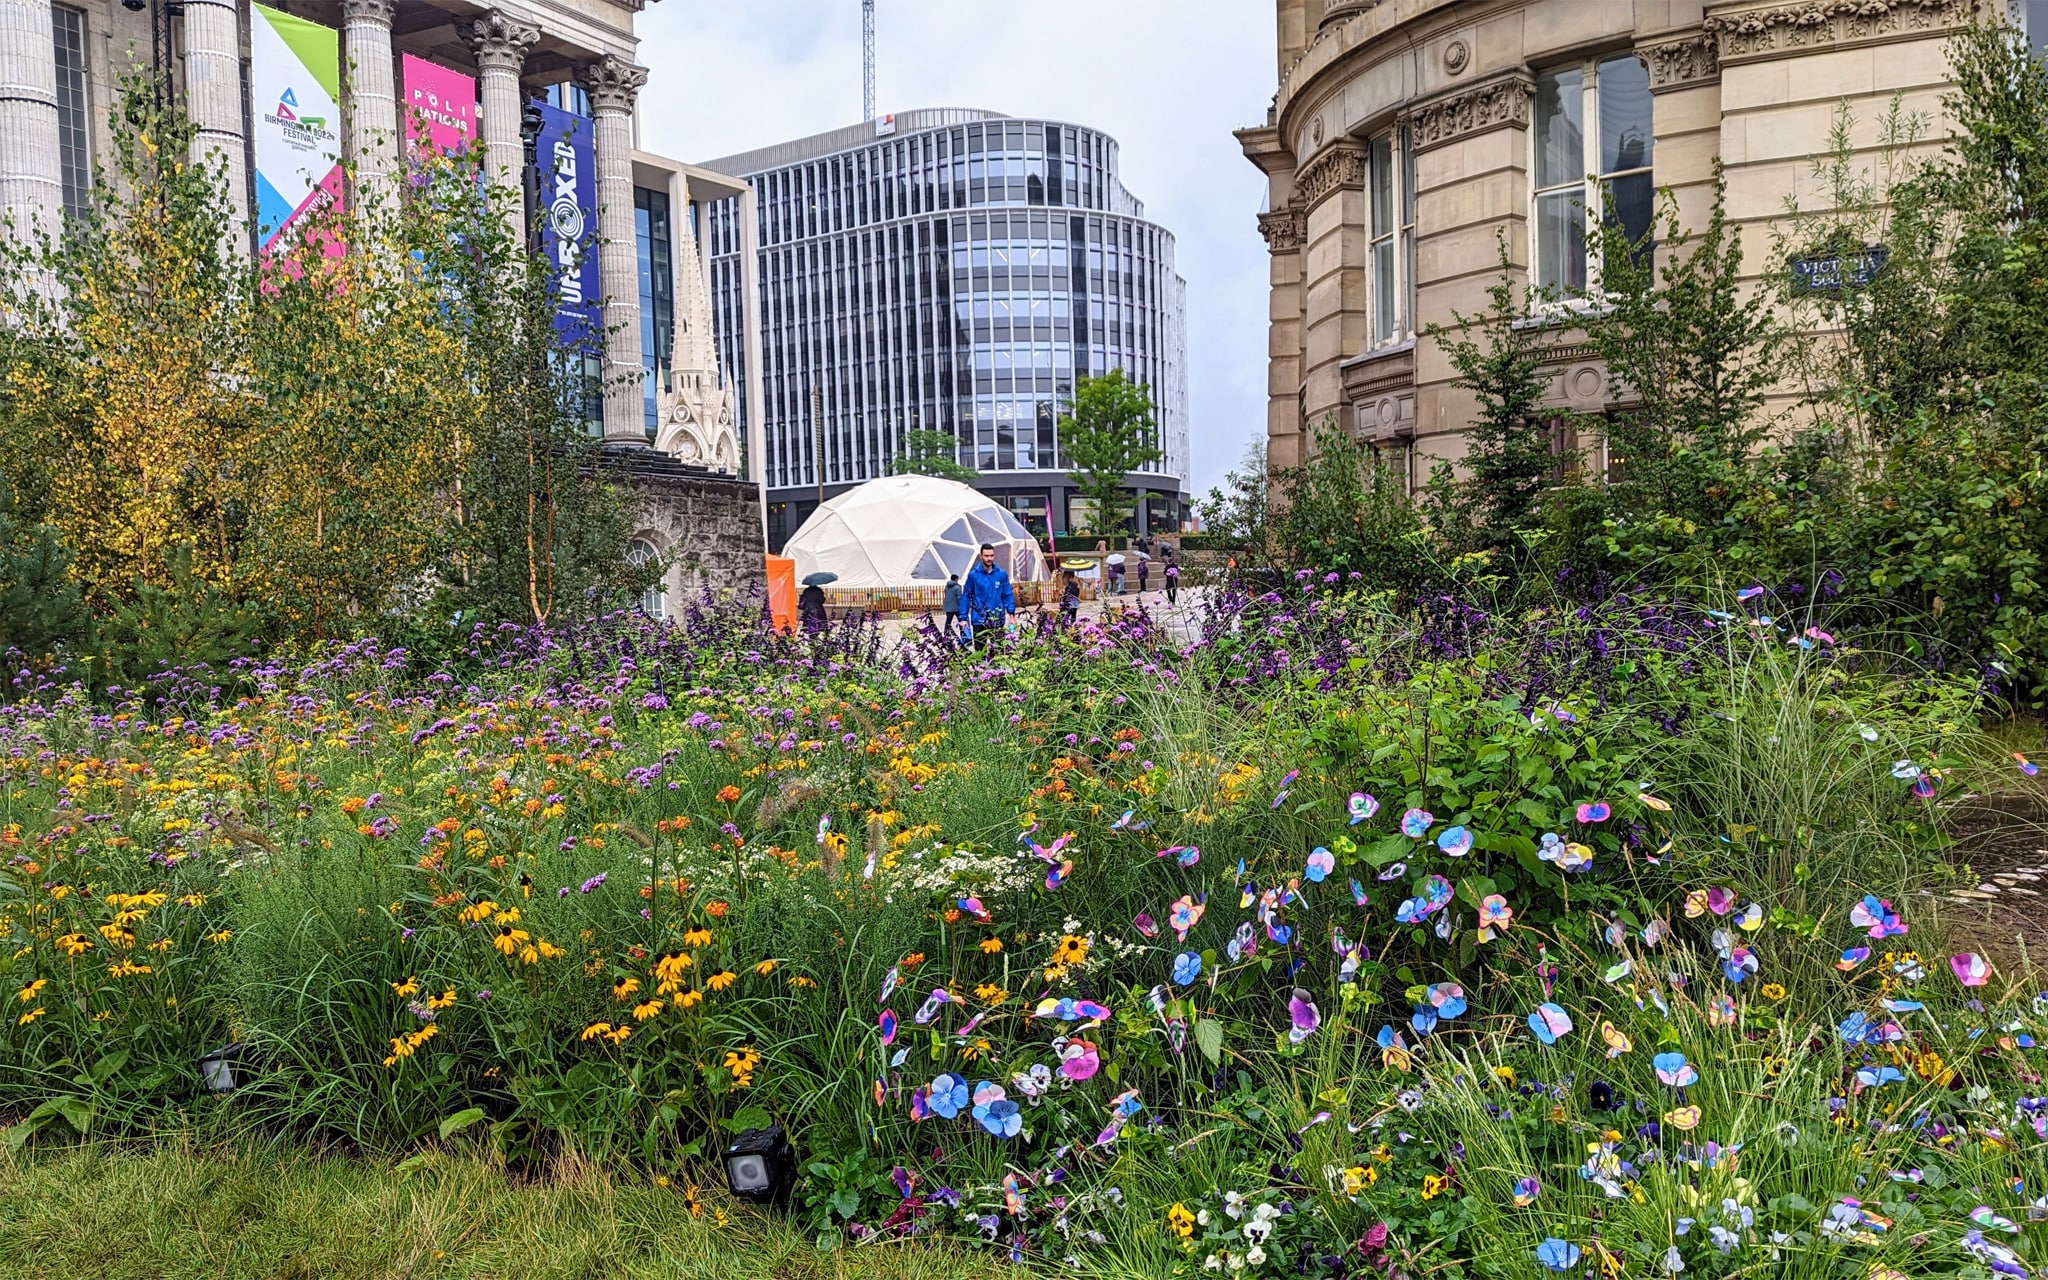 Garden of flowers created in Victoria Square by Poli-Nations.